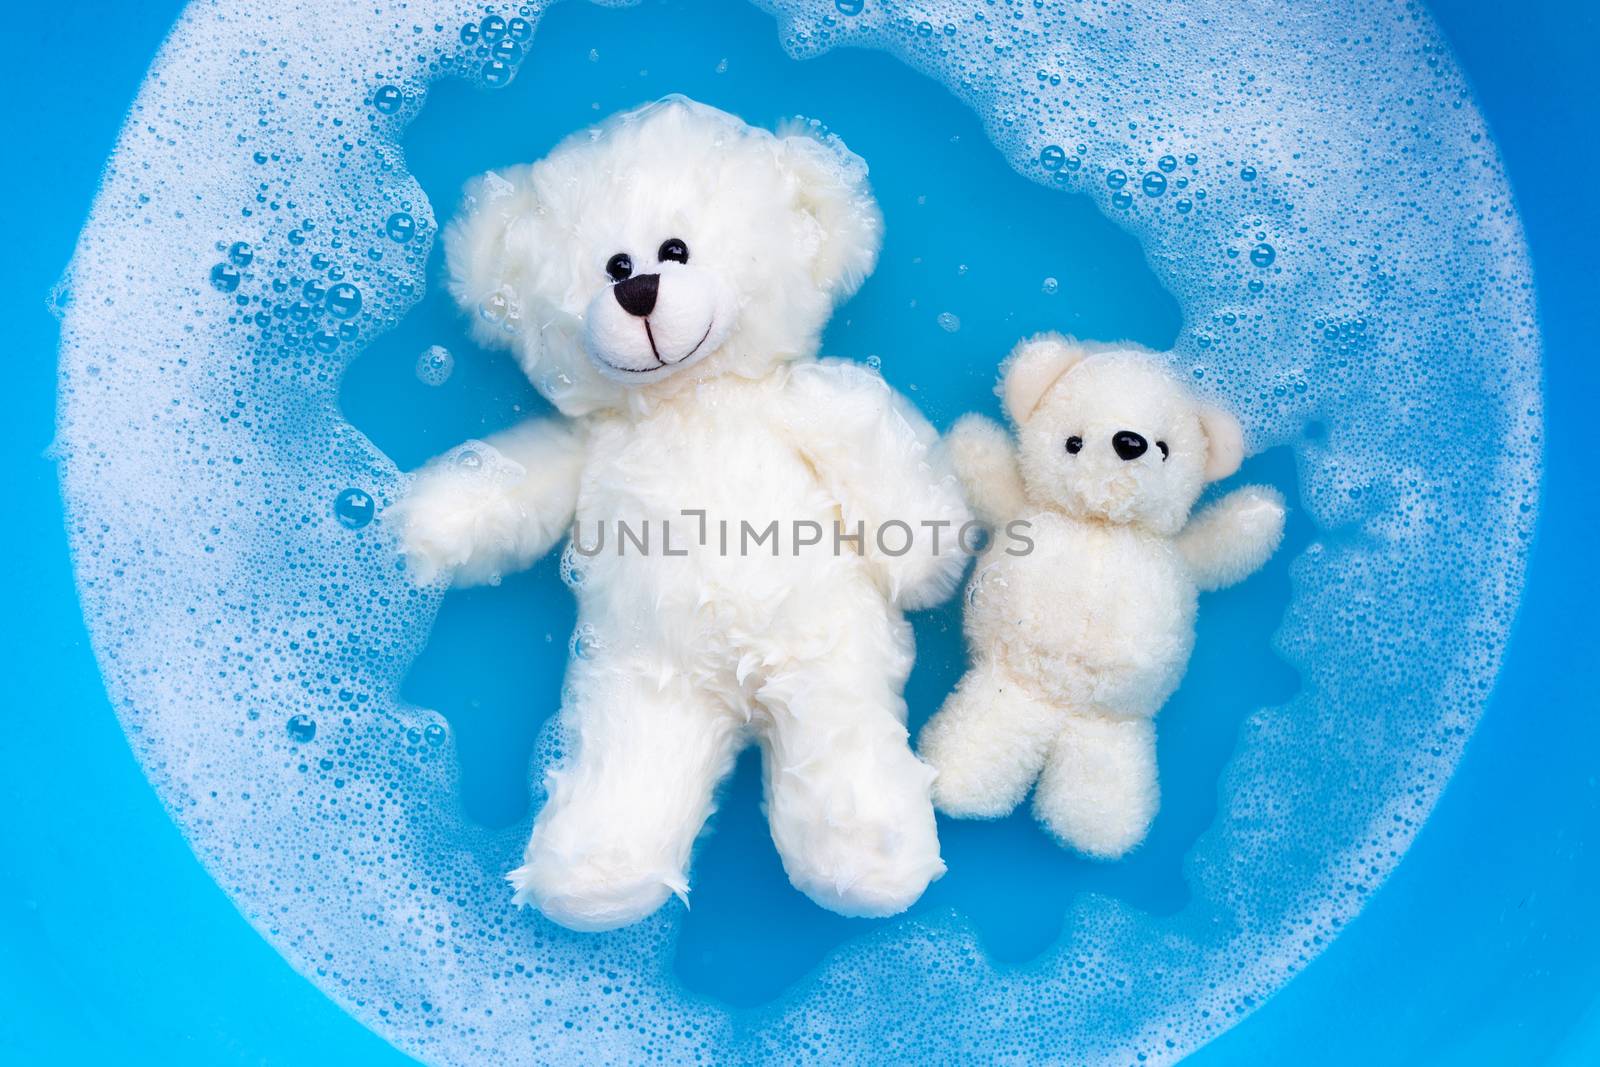 Soak toy bears in laundry detergent water dissolution before was by Bowonpat